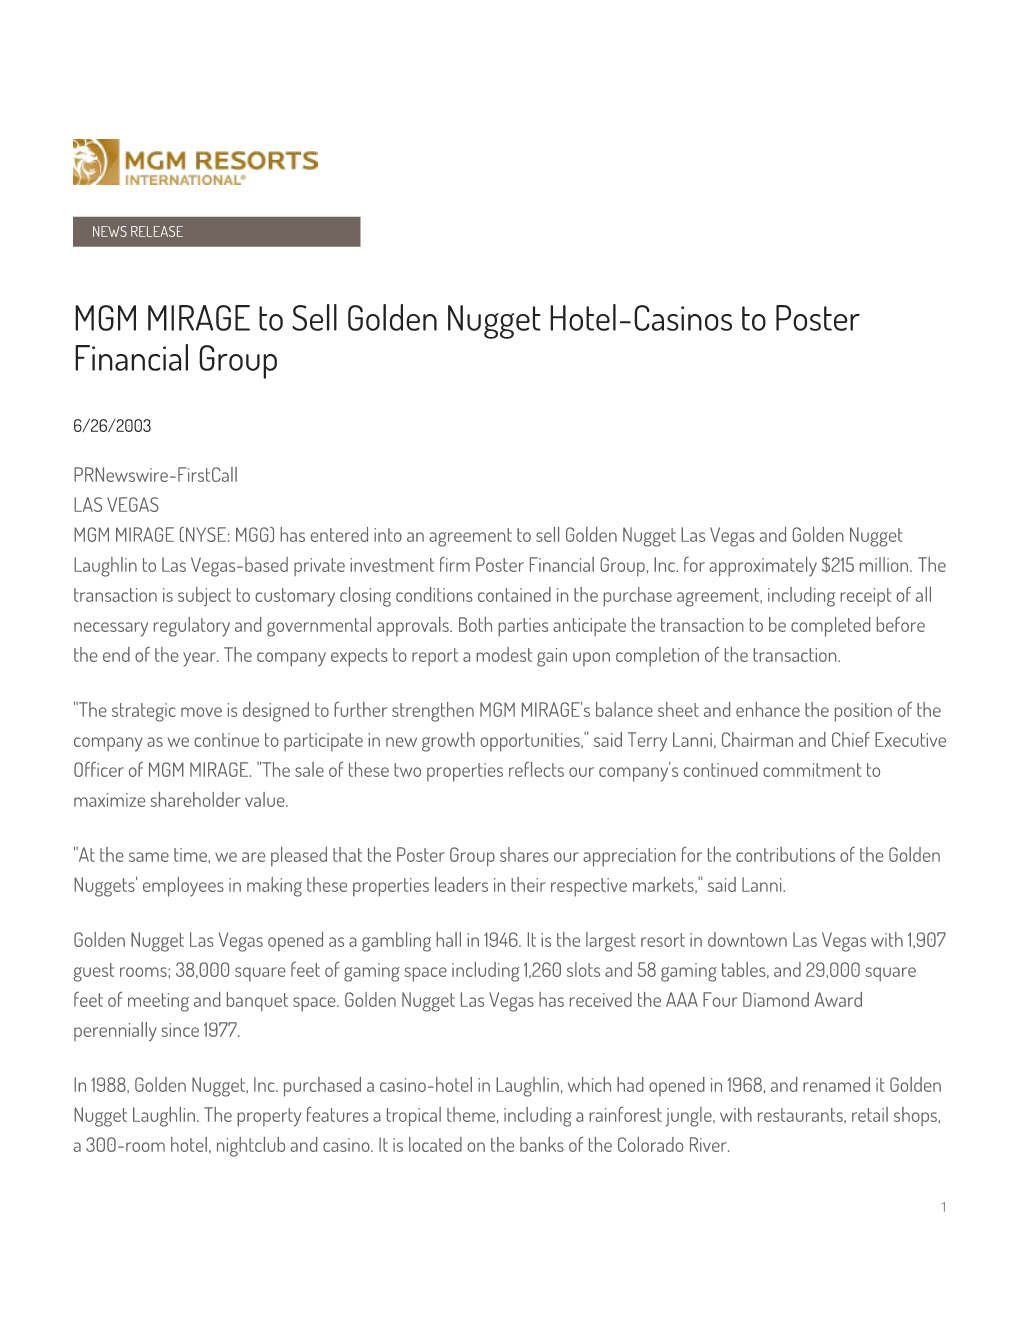 MGM MIRAGE to Sell Golden Nugget Hotel-Casinos to Poster Financial Group